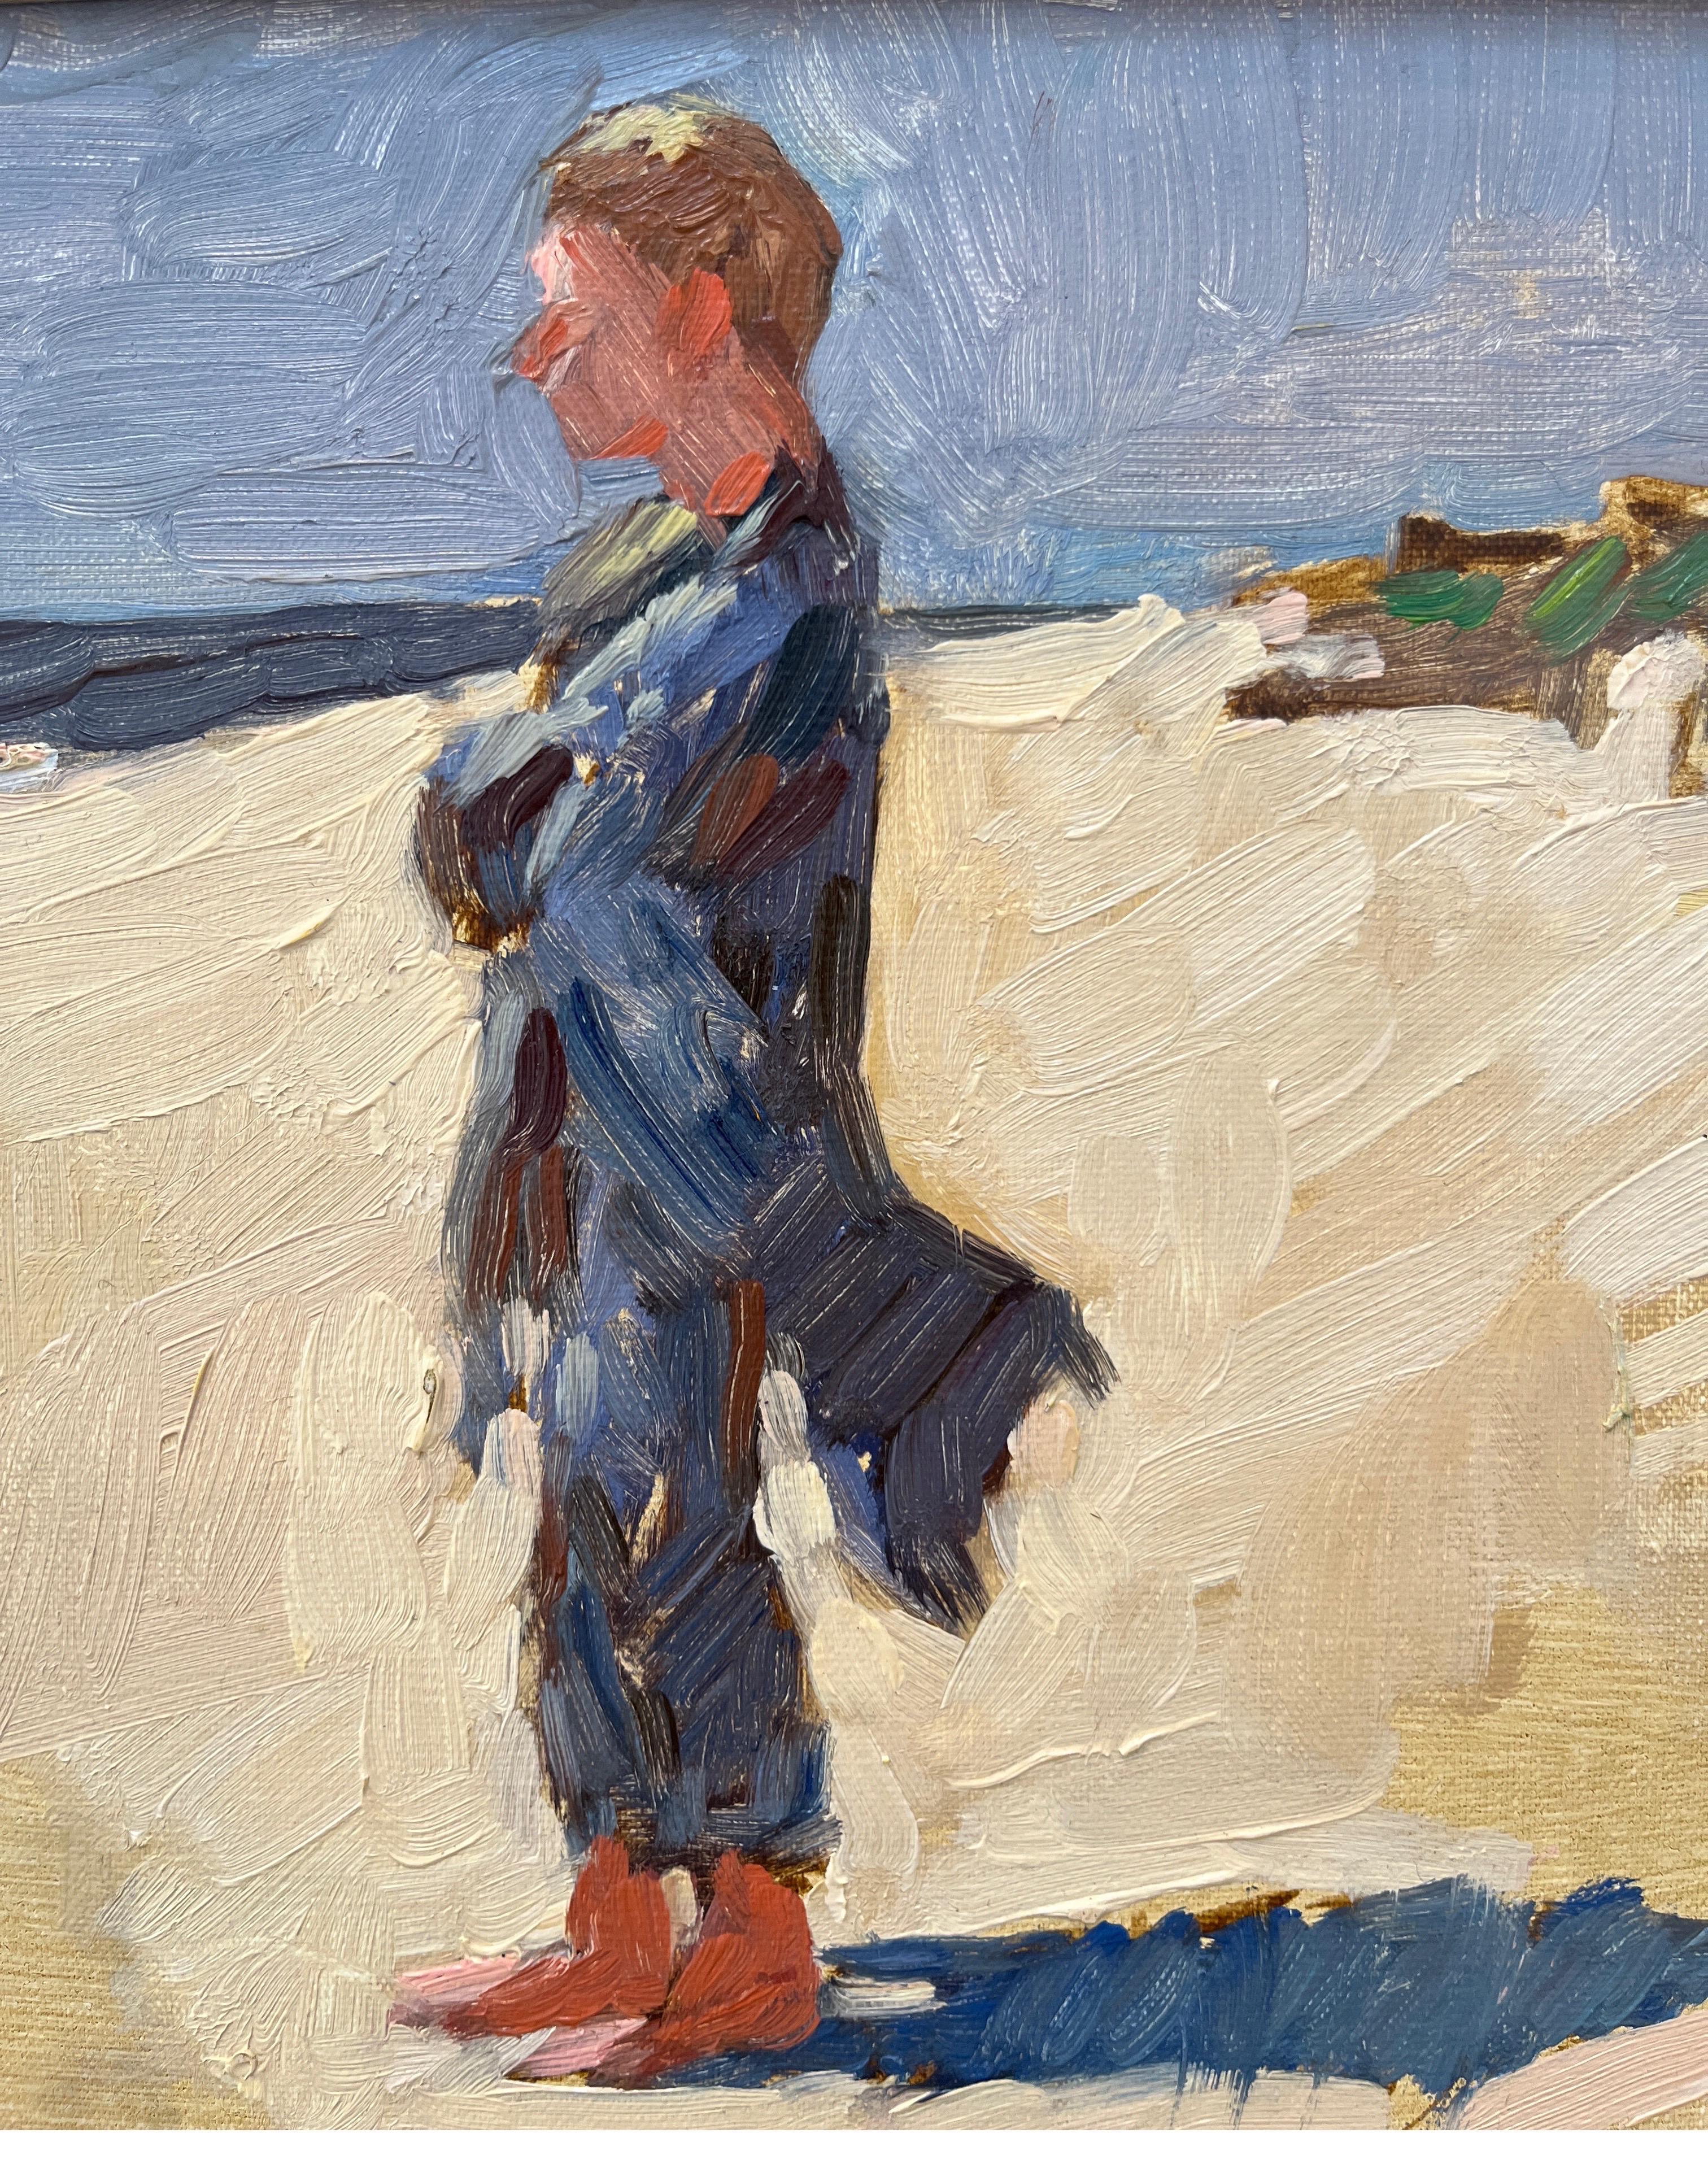 On the Beach - American Impressionist Painting by Tim McGuire